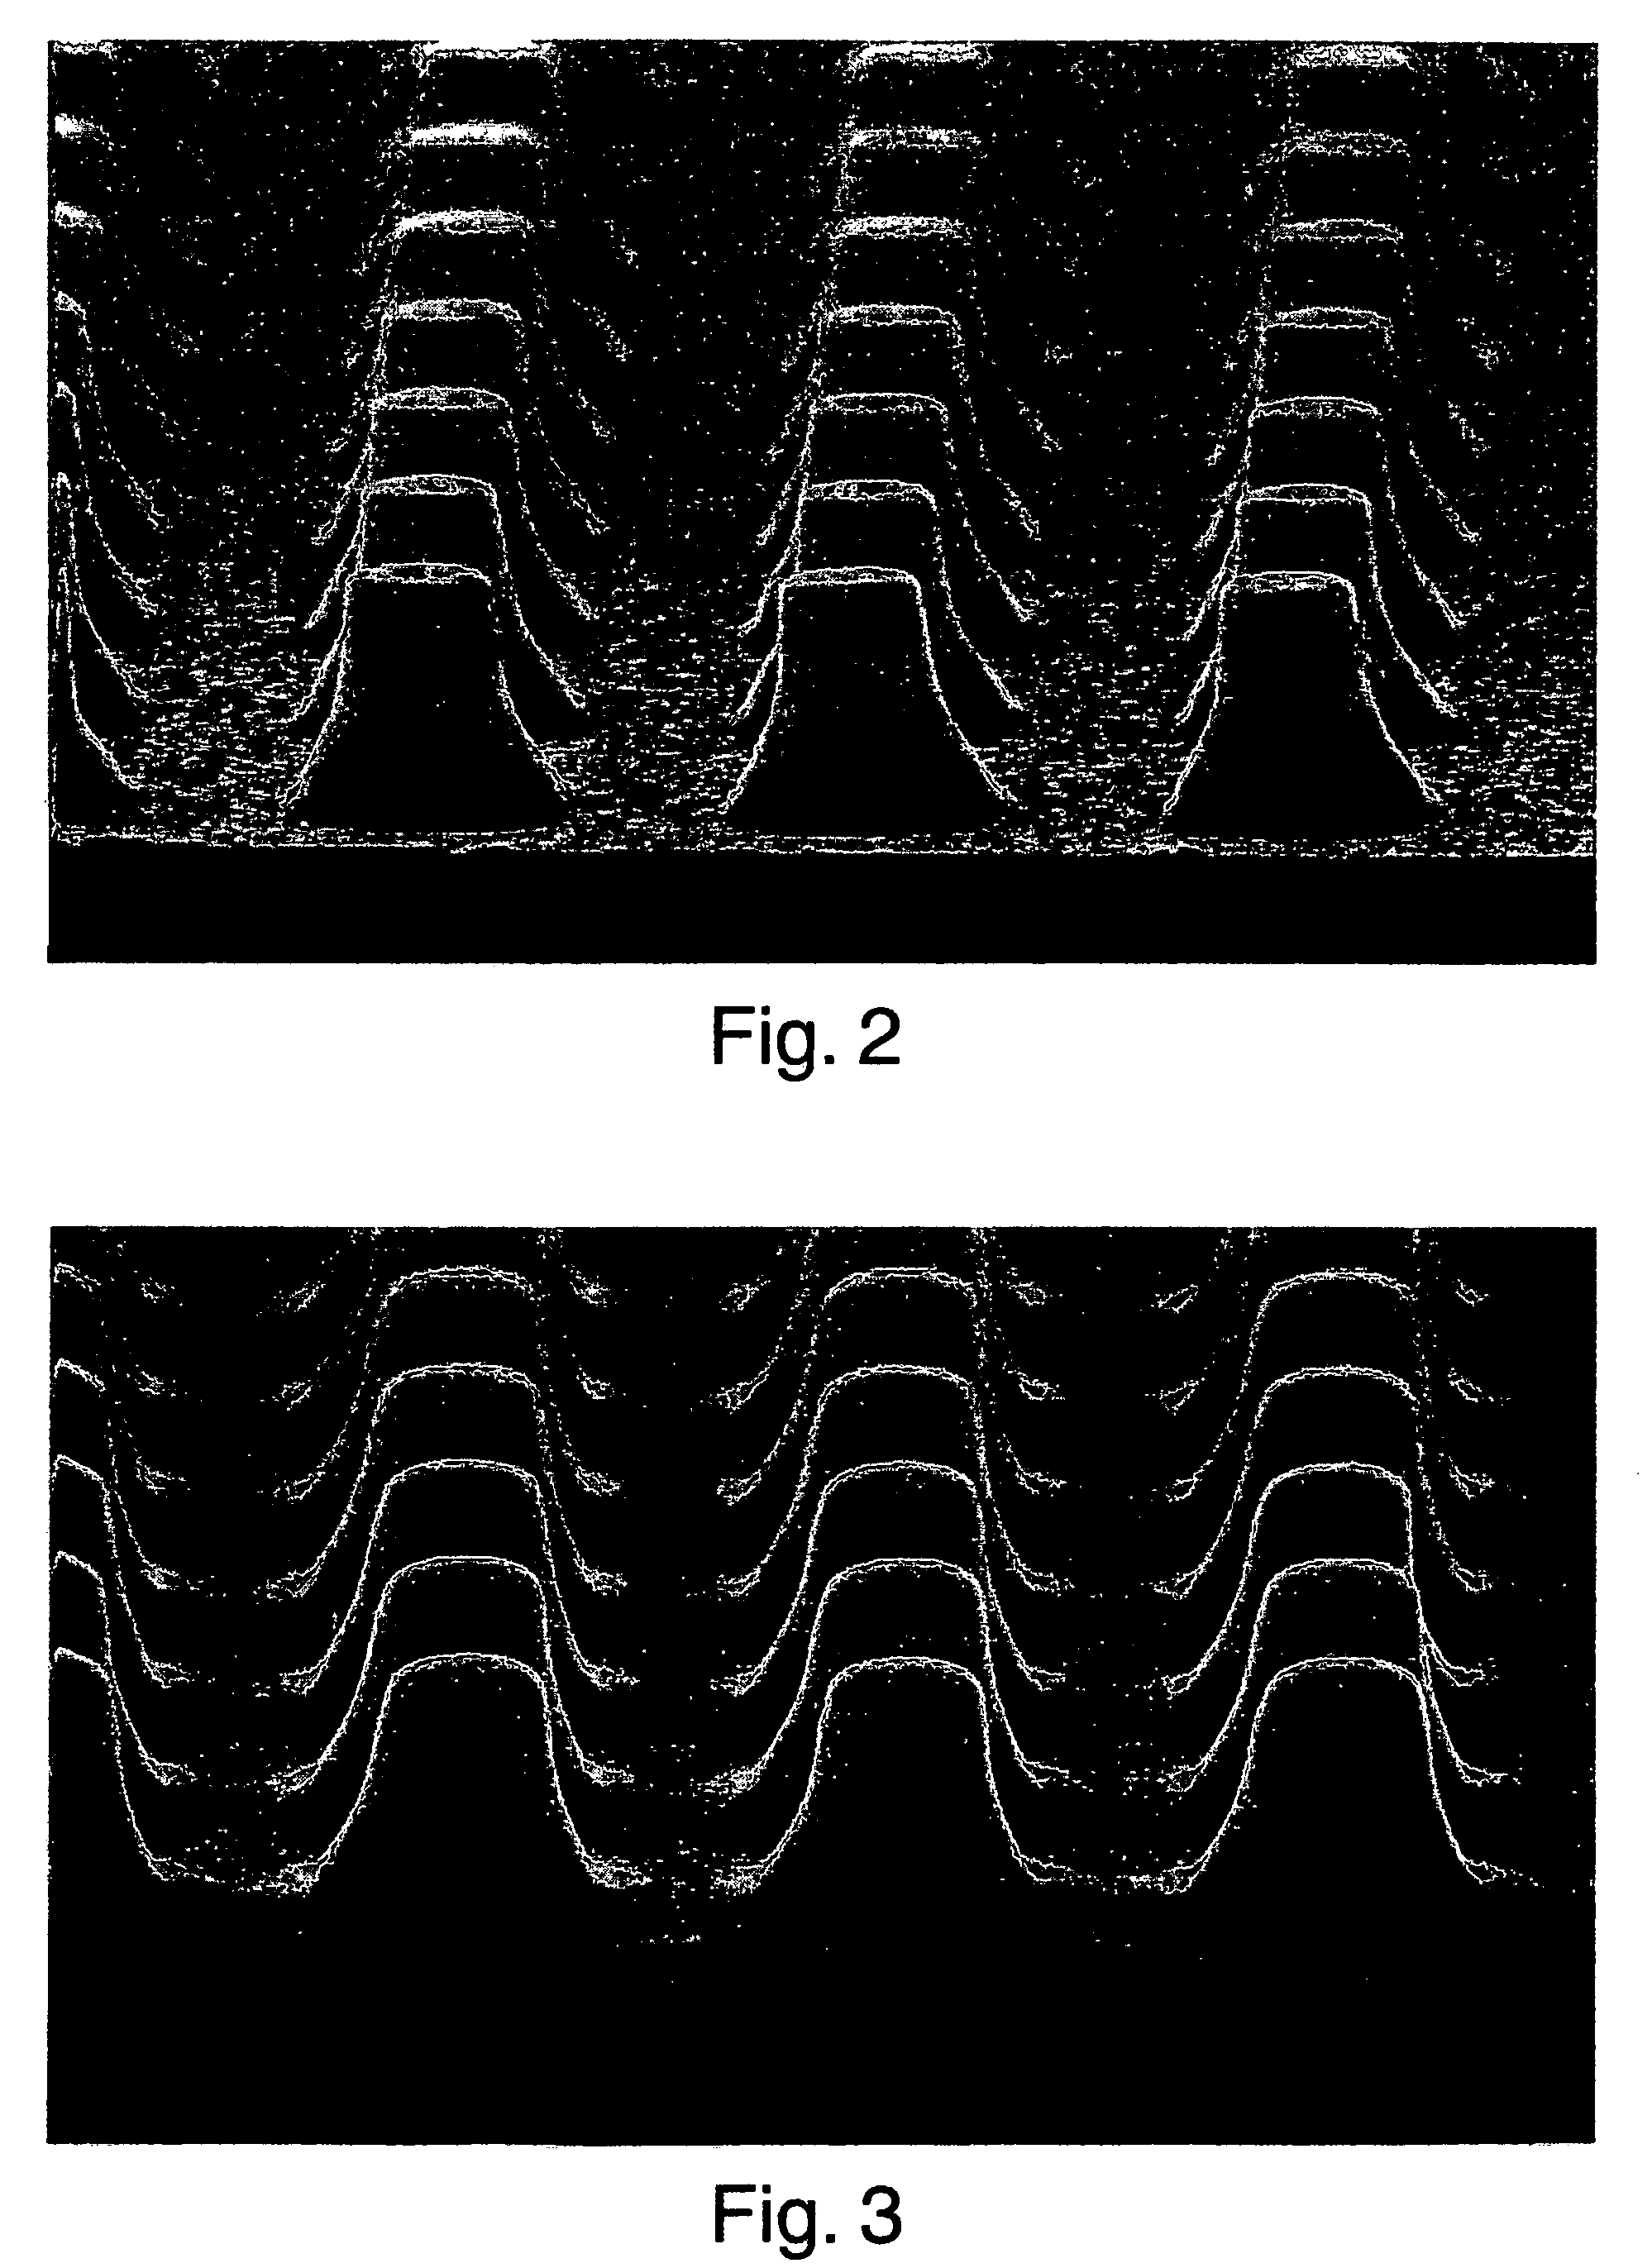 Liquid crystal device, compositions and method of manufacture